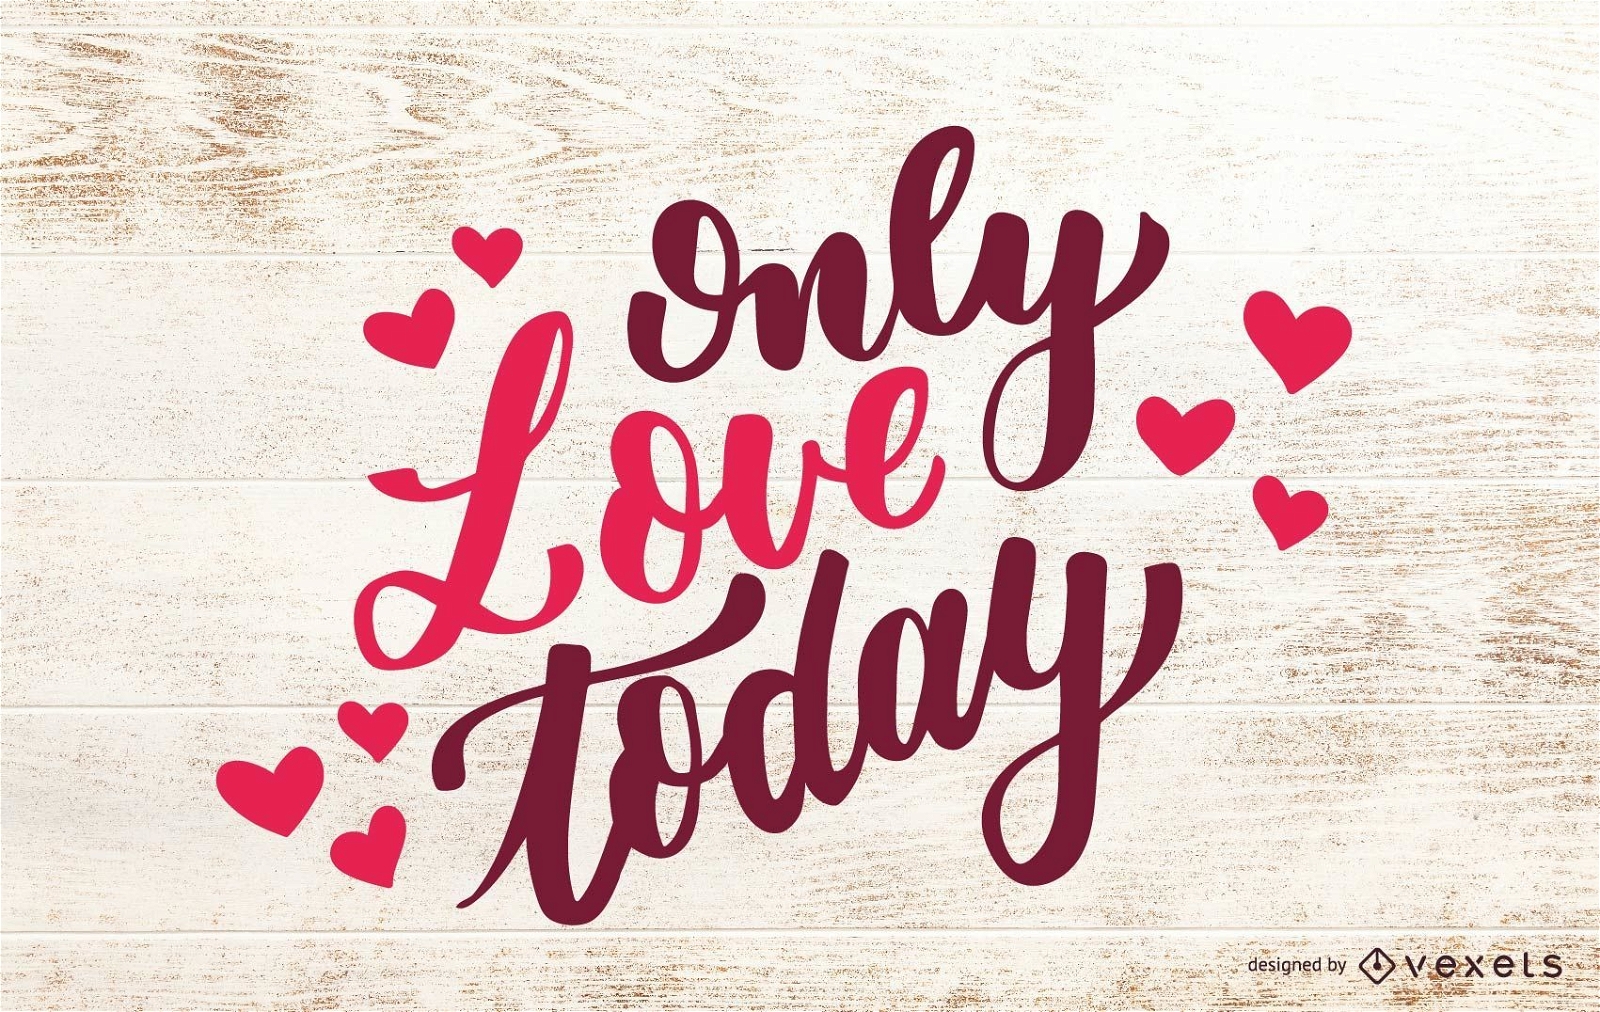 Love Today Lettering Design